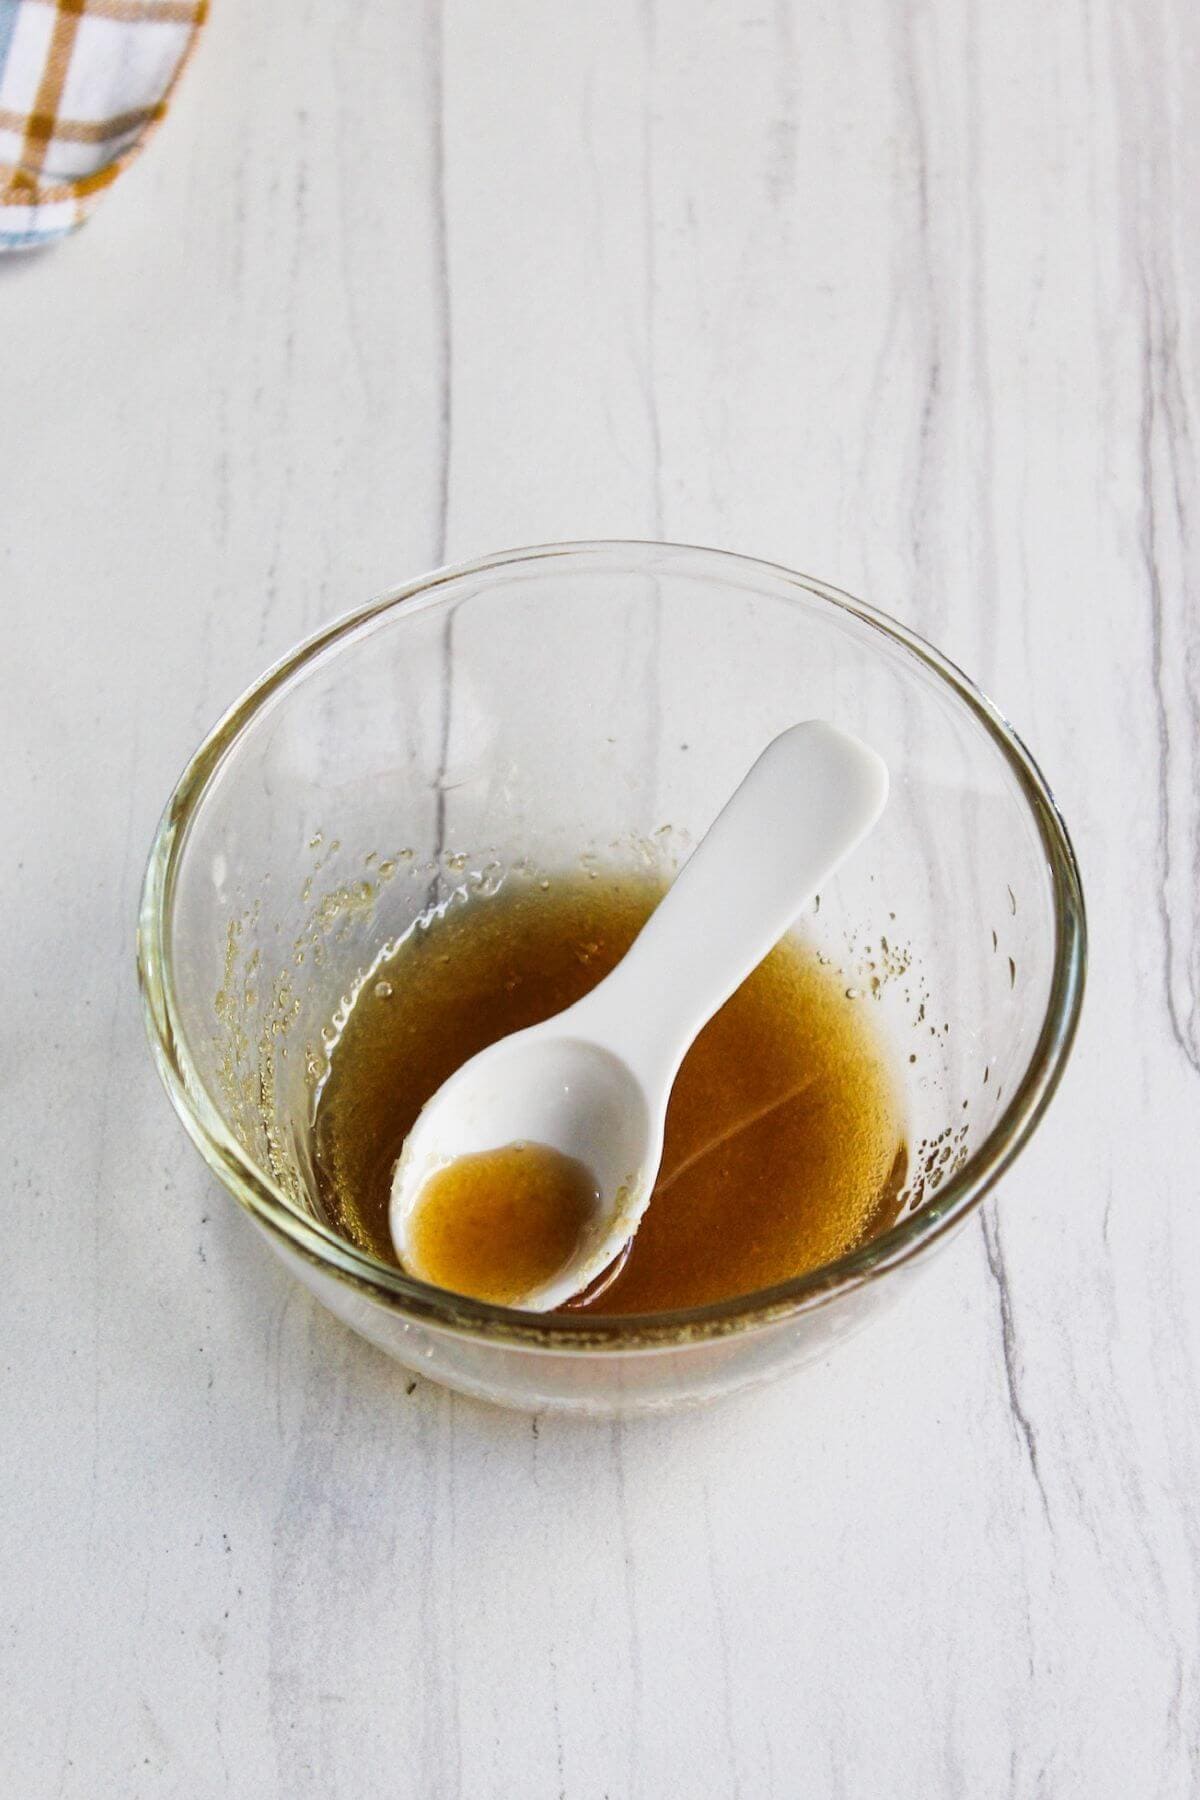 A glass bowl of brown sugar glaze with spoon.